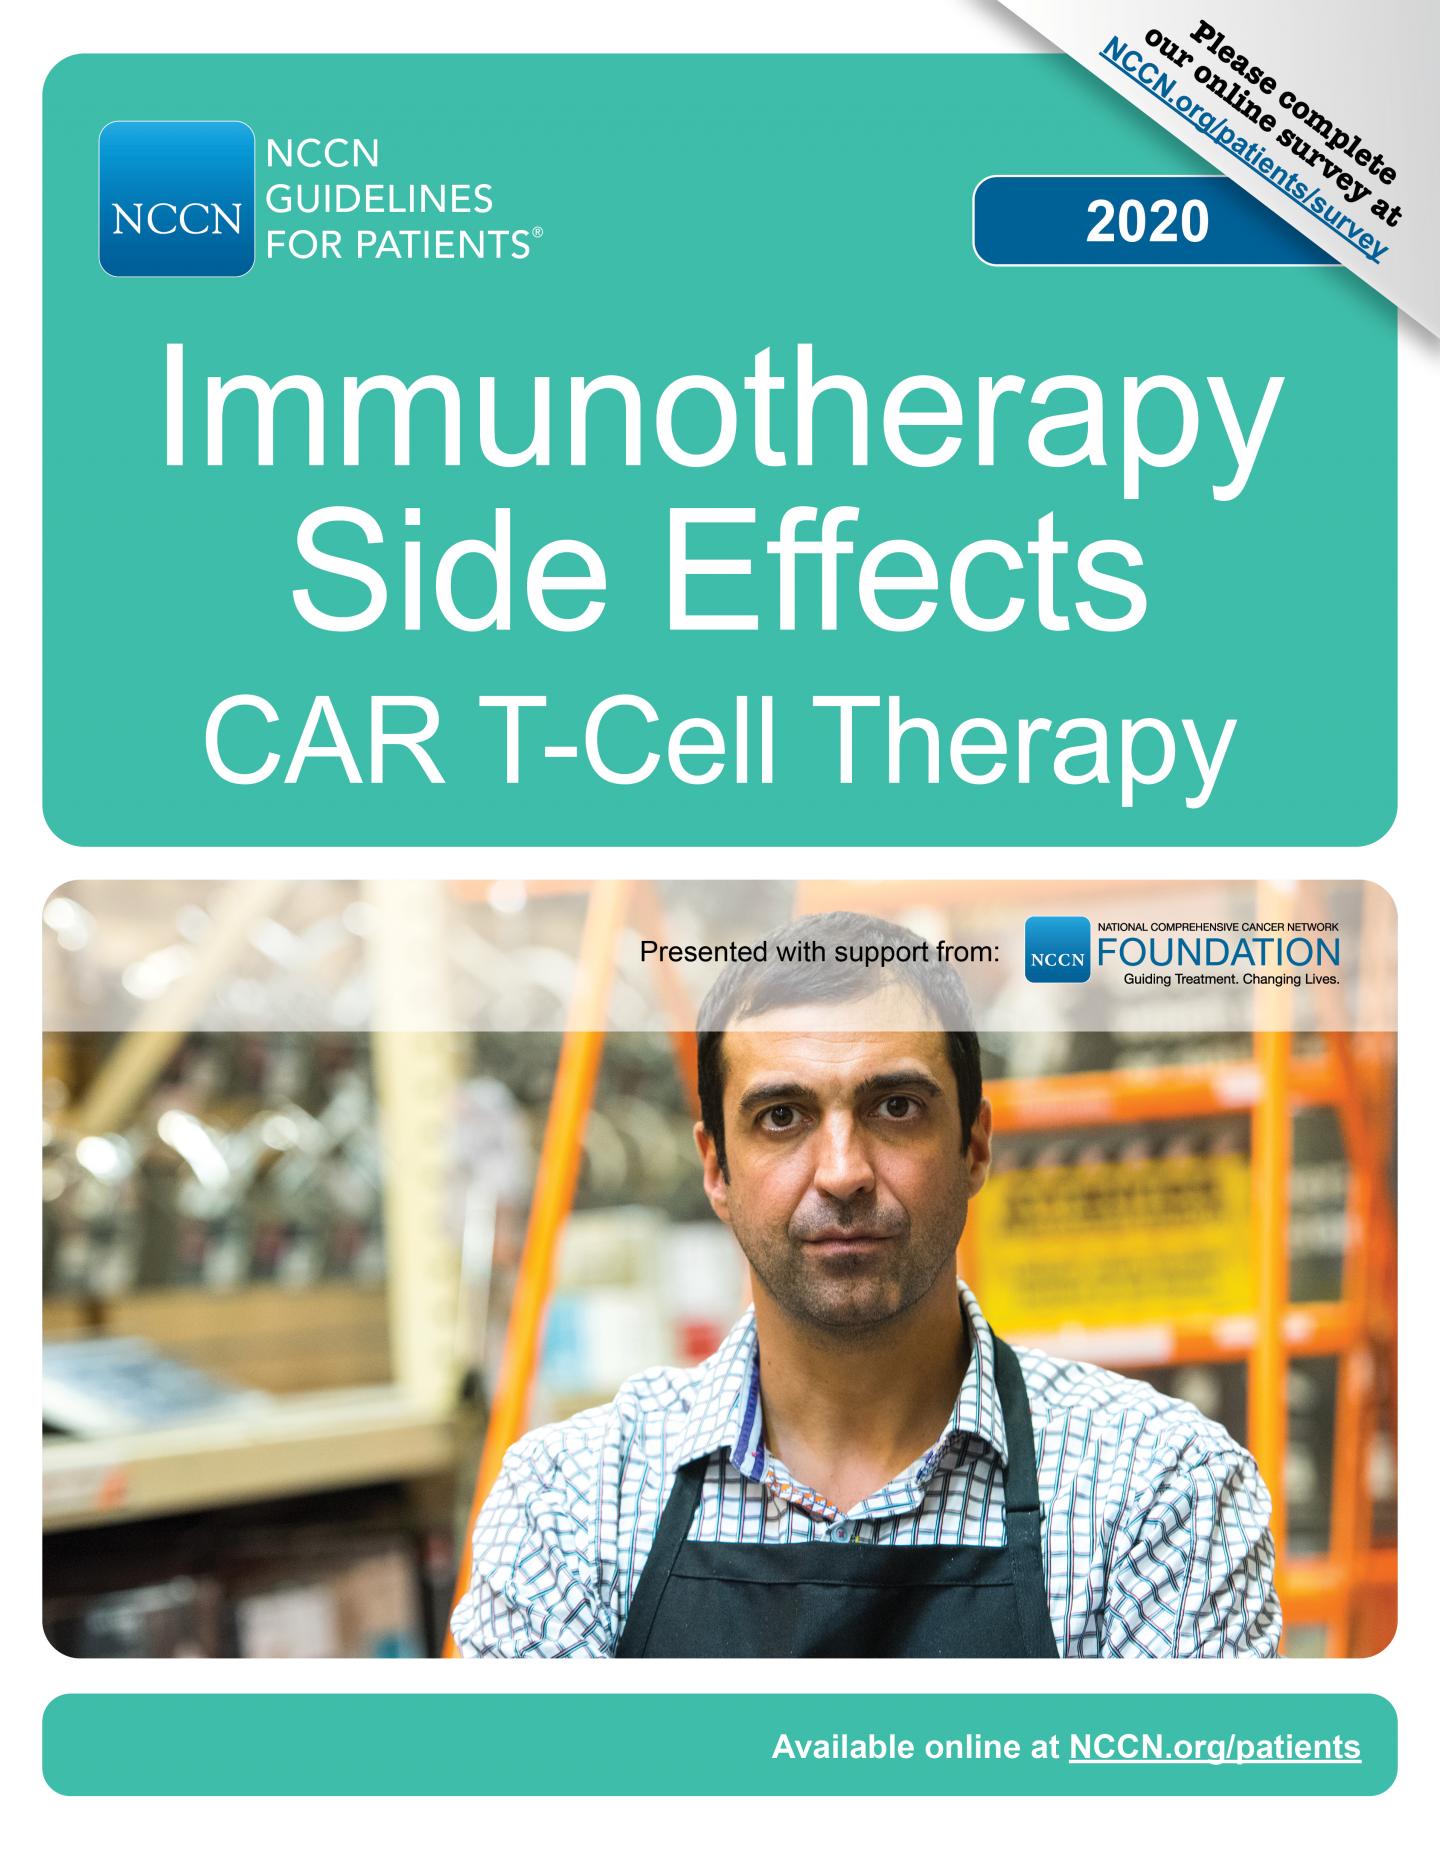 NCCN Guidelines for Patients®: Immunotherapy Side Effects -- CAR T-Cell Therapy